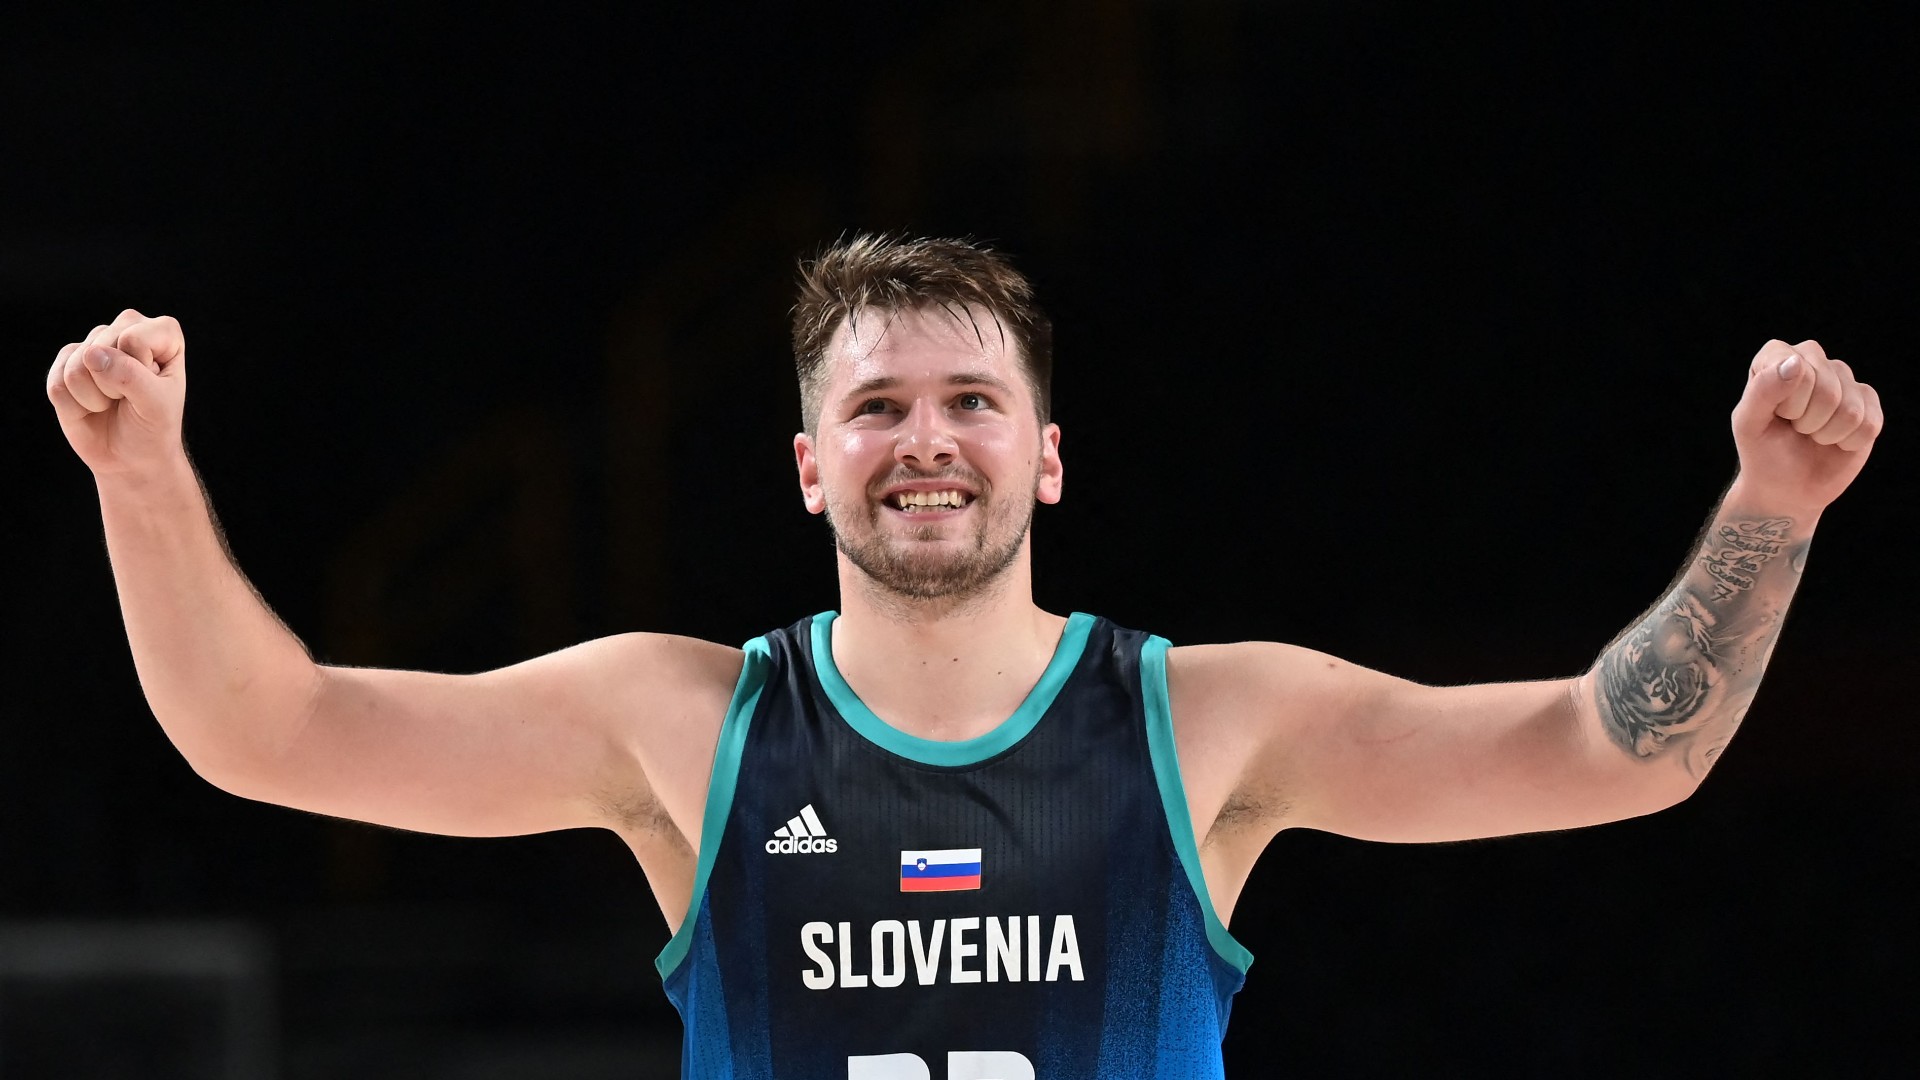 Tokyo Olympics: Doncic Hailed As 'Best Player In The World' After Stunning Opening Showing